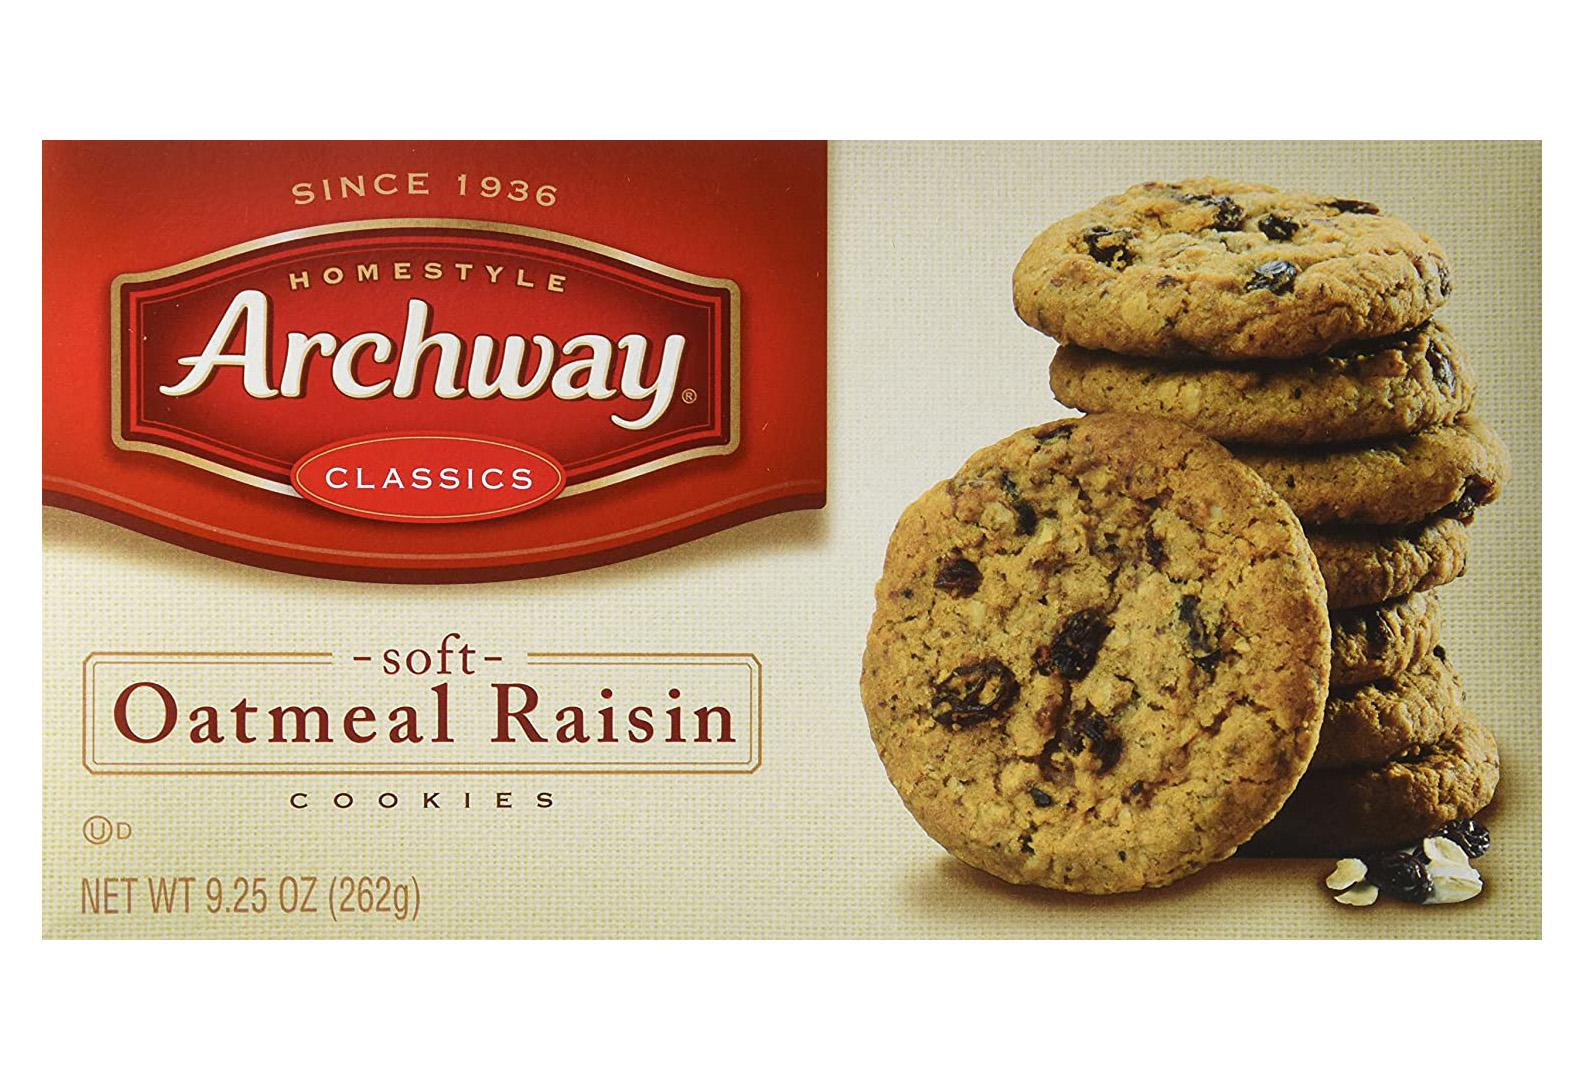 Archway Classic Oatmeal Raisin Cookies for $16.88 Shipped